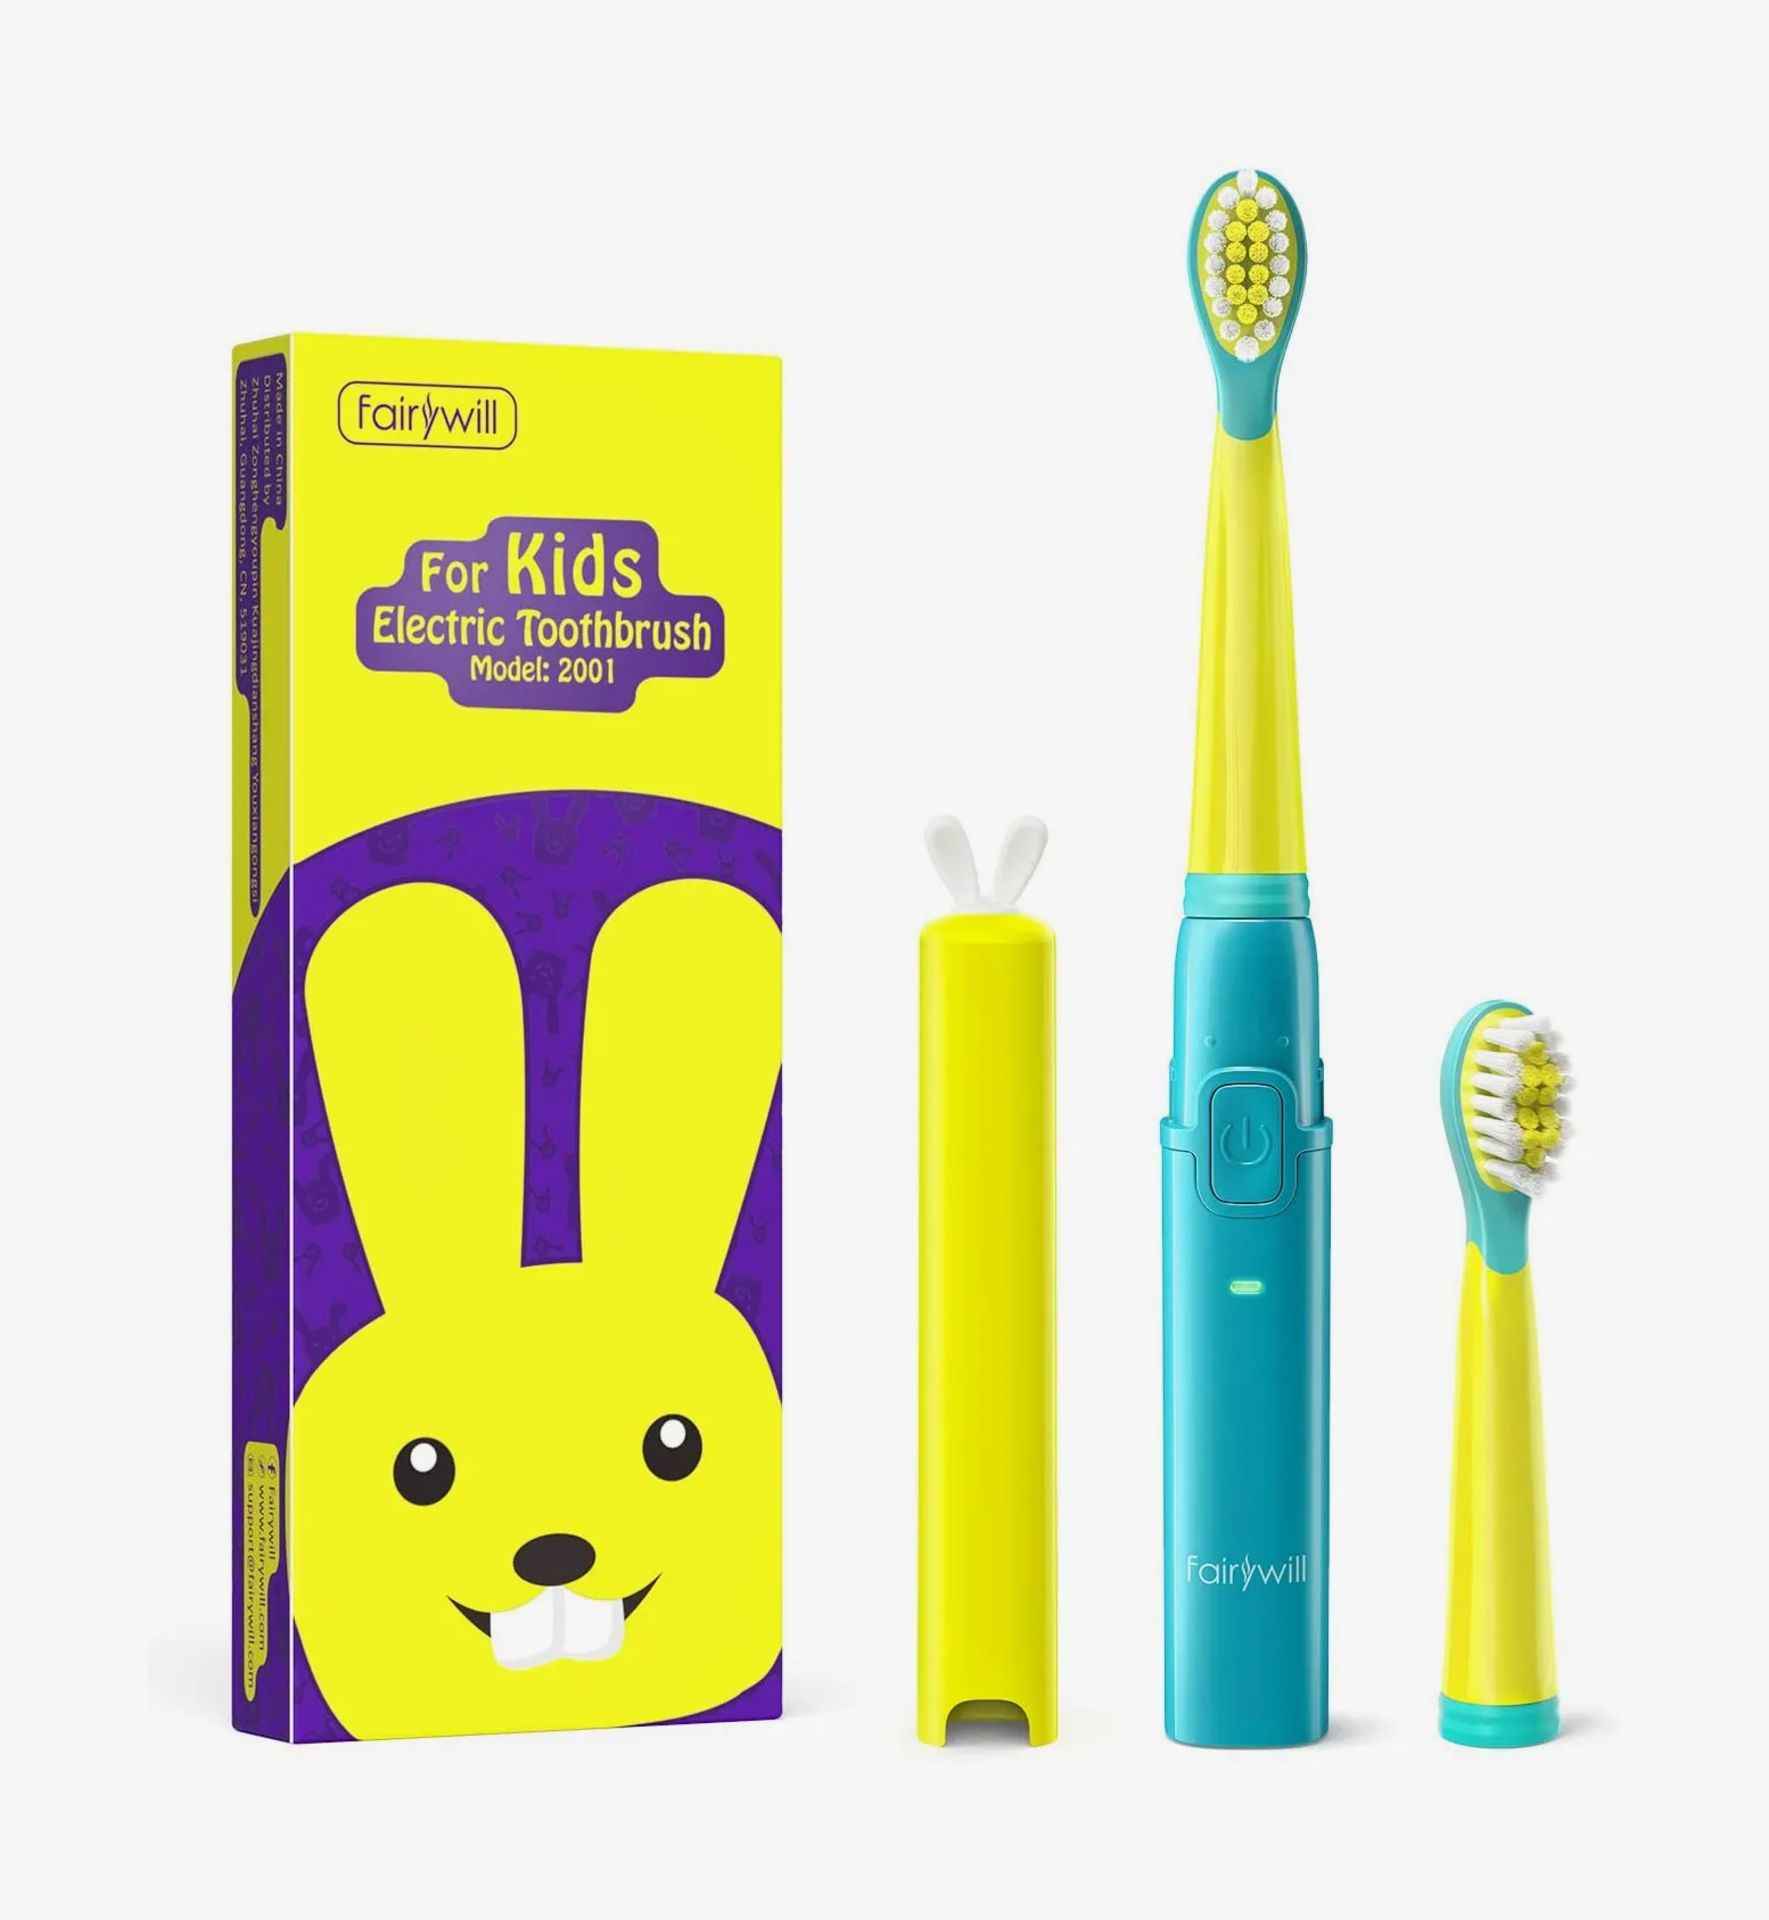 Fairywill Family Kids Care Electric Toothbrush Soft Clean Safe Baby Children